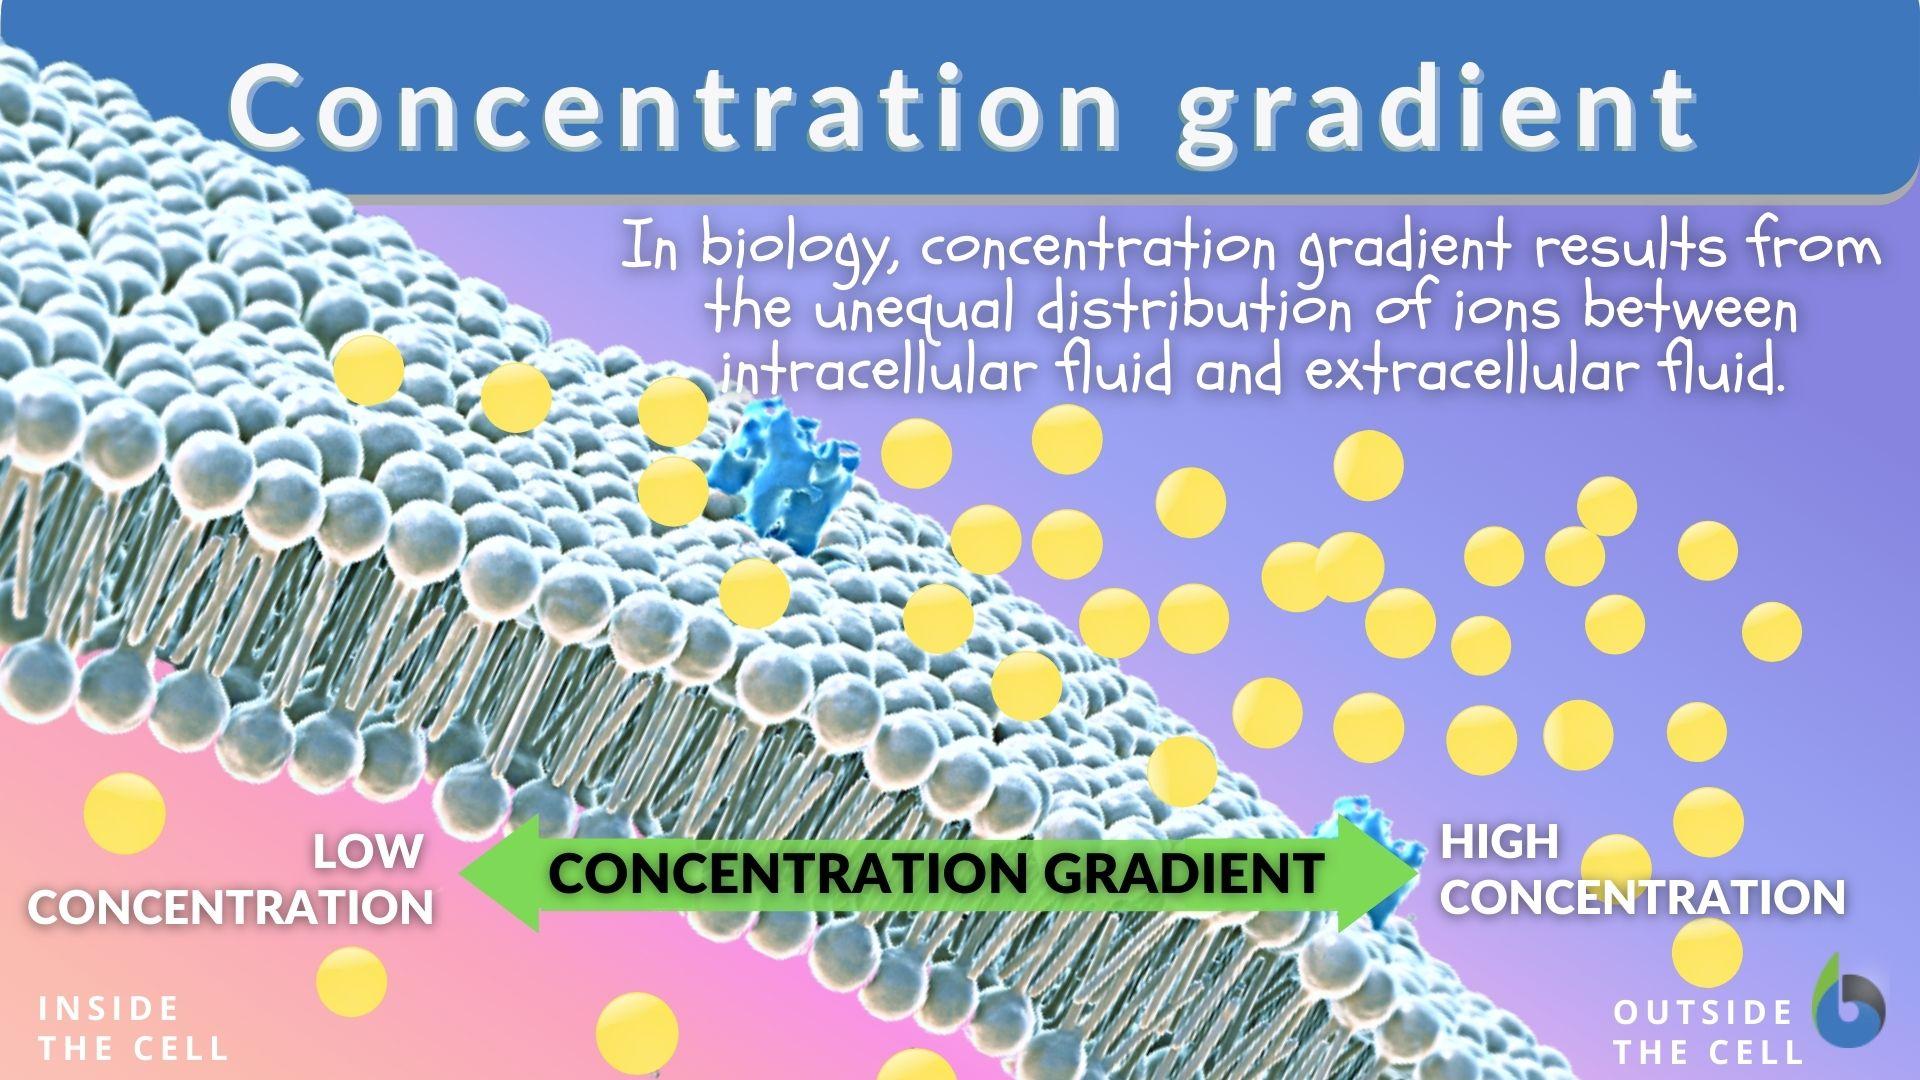 Concentration gradient - Definition and Examples